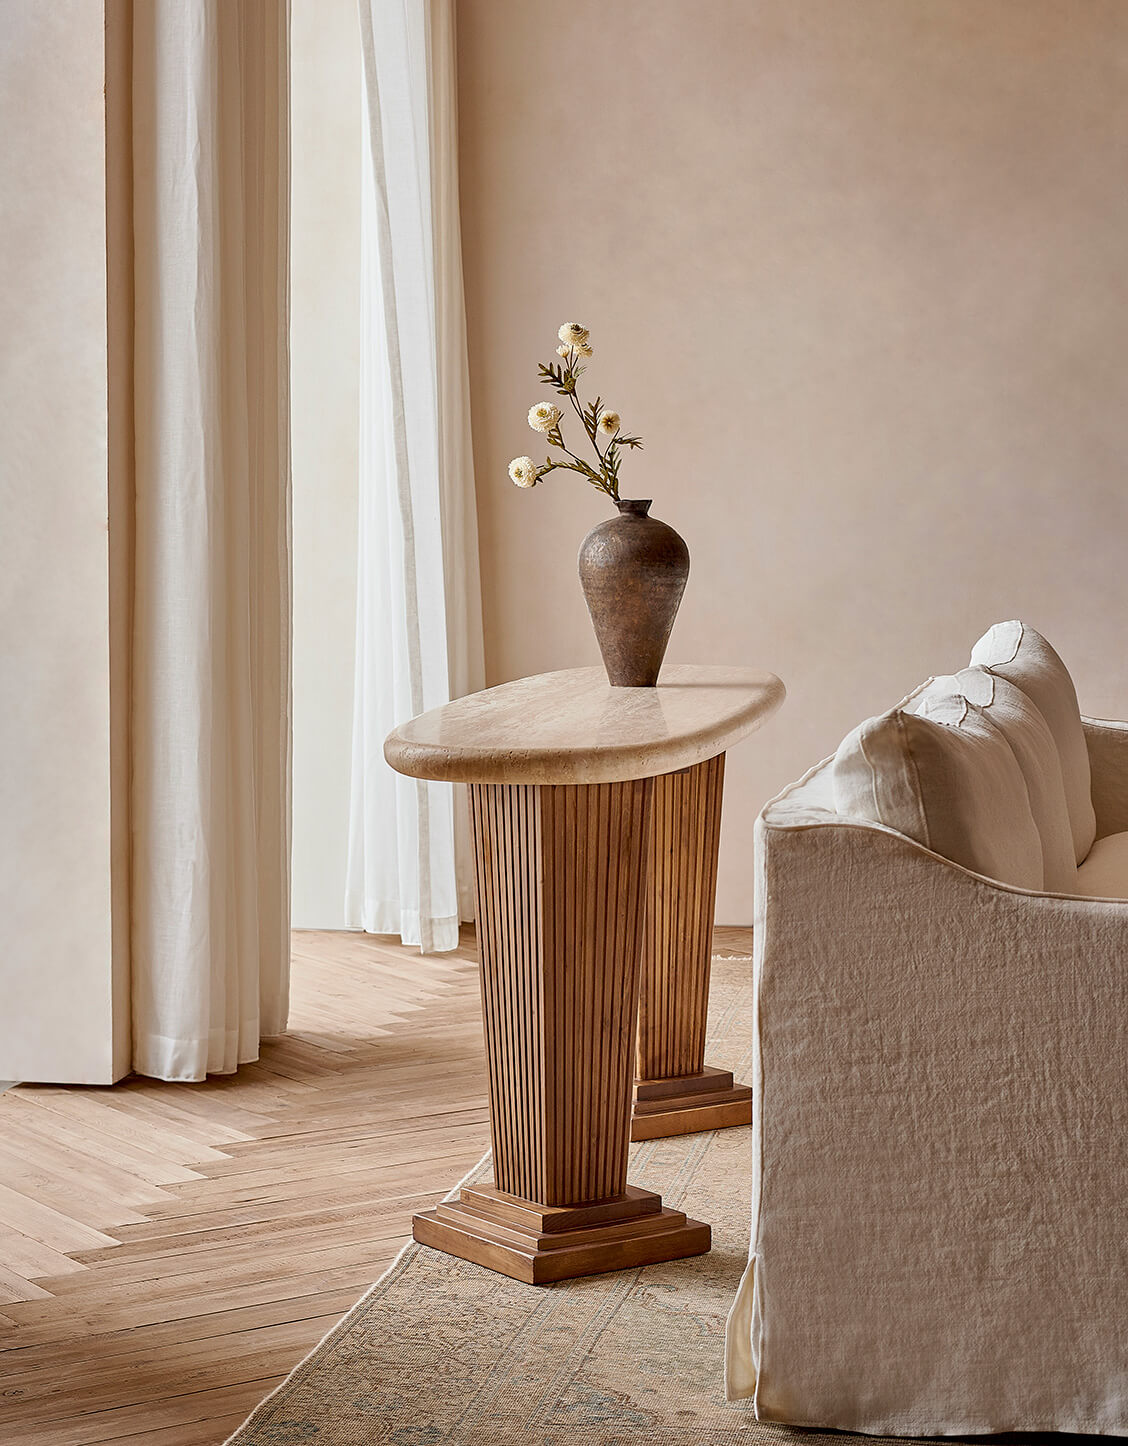 Cordelia Console Table in Galata Travertine and Heritage Pine placed behind the Amelia Sofa